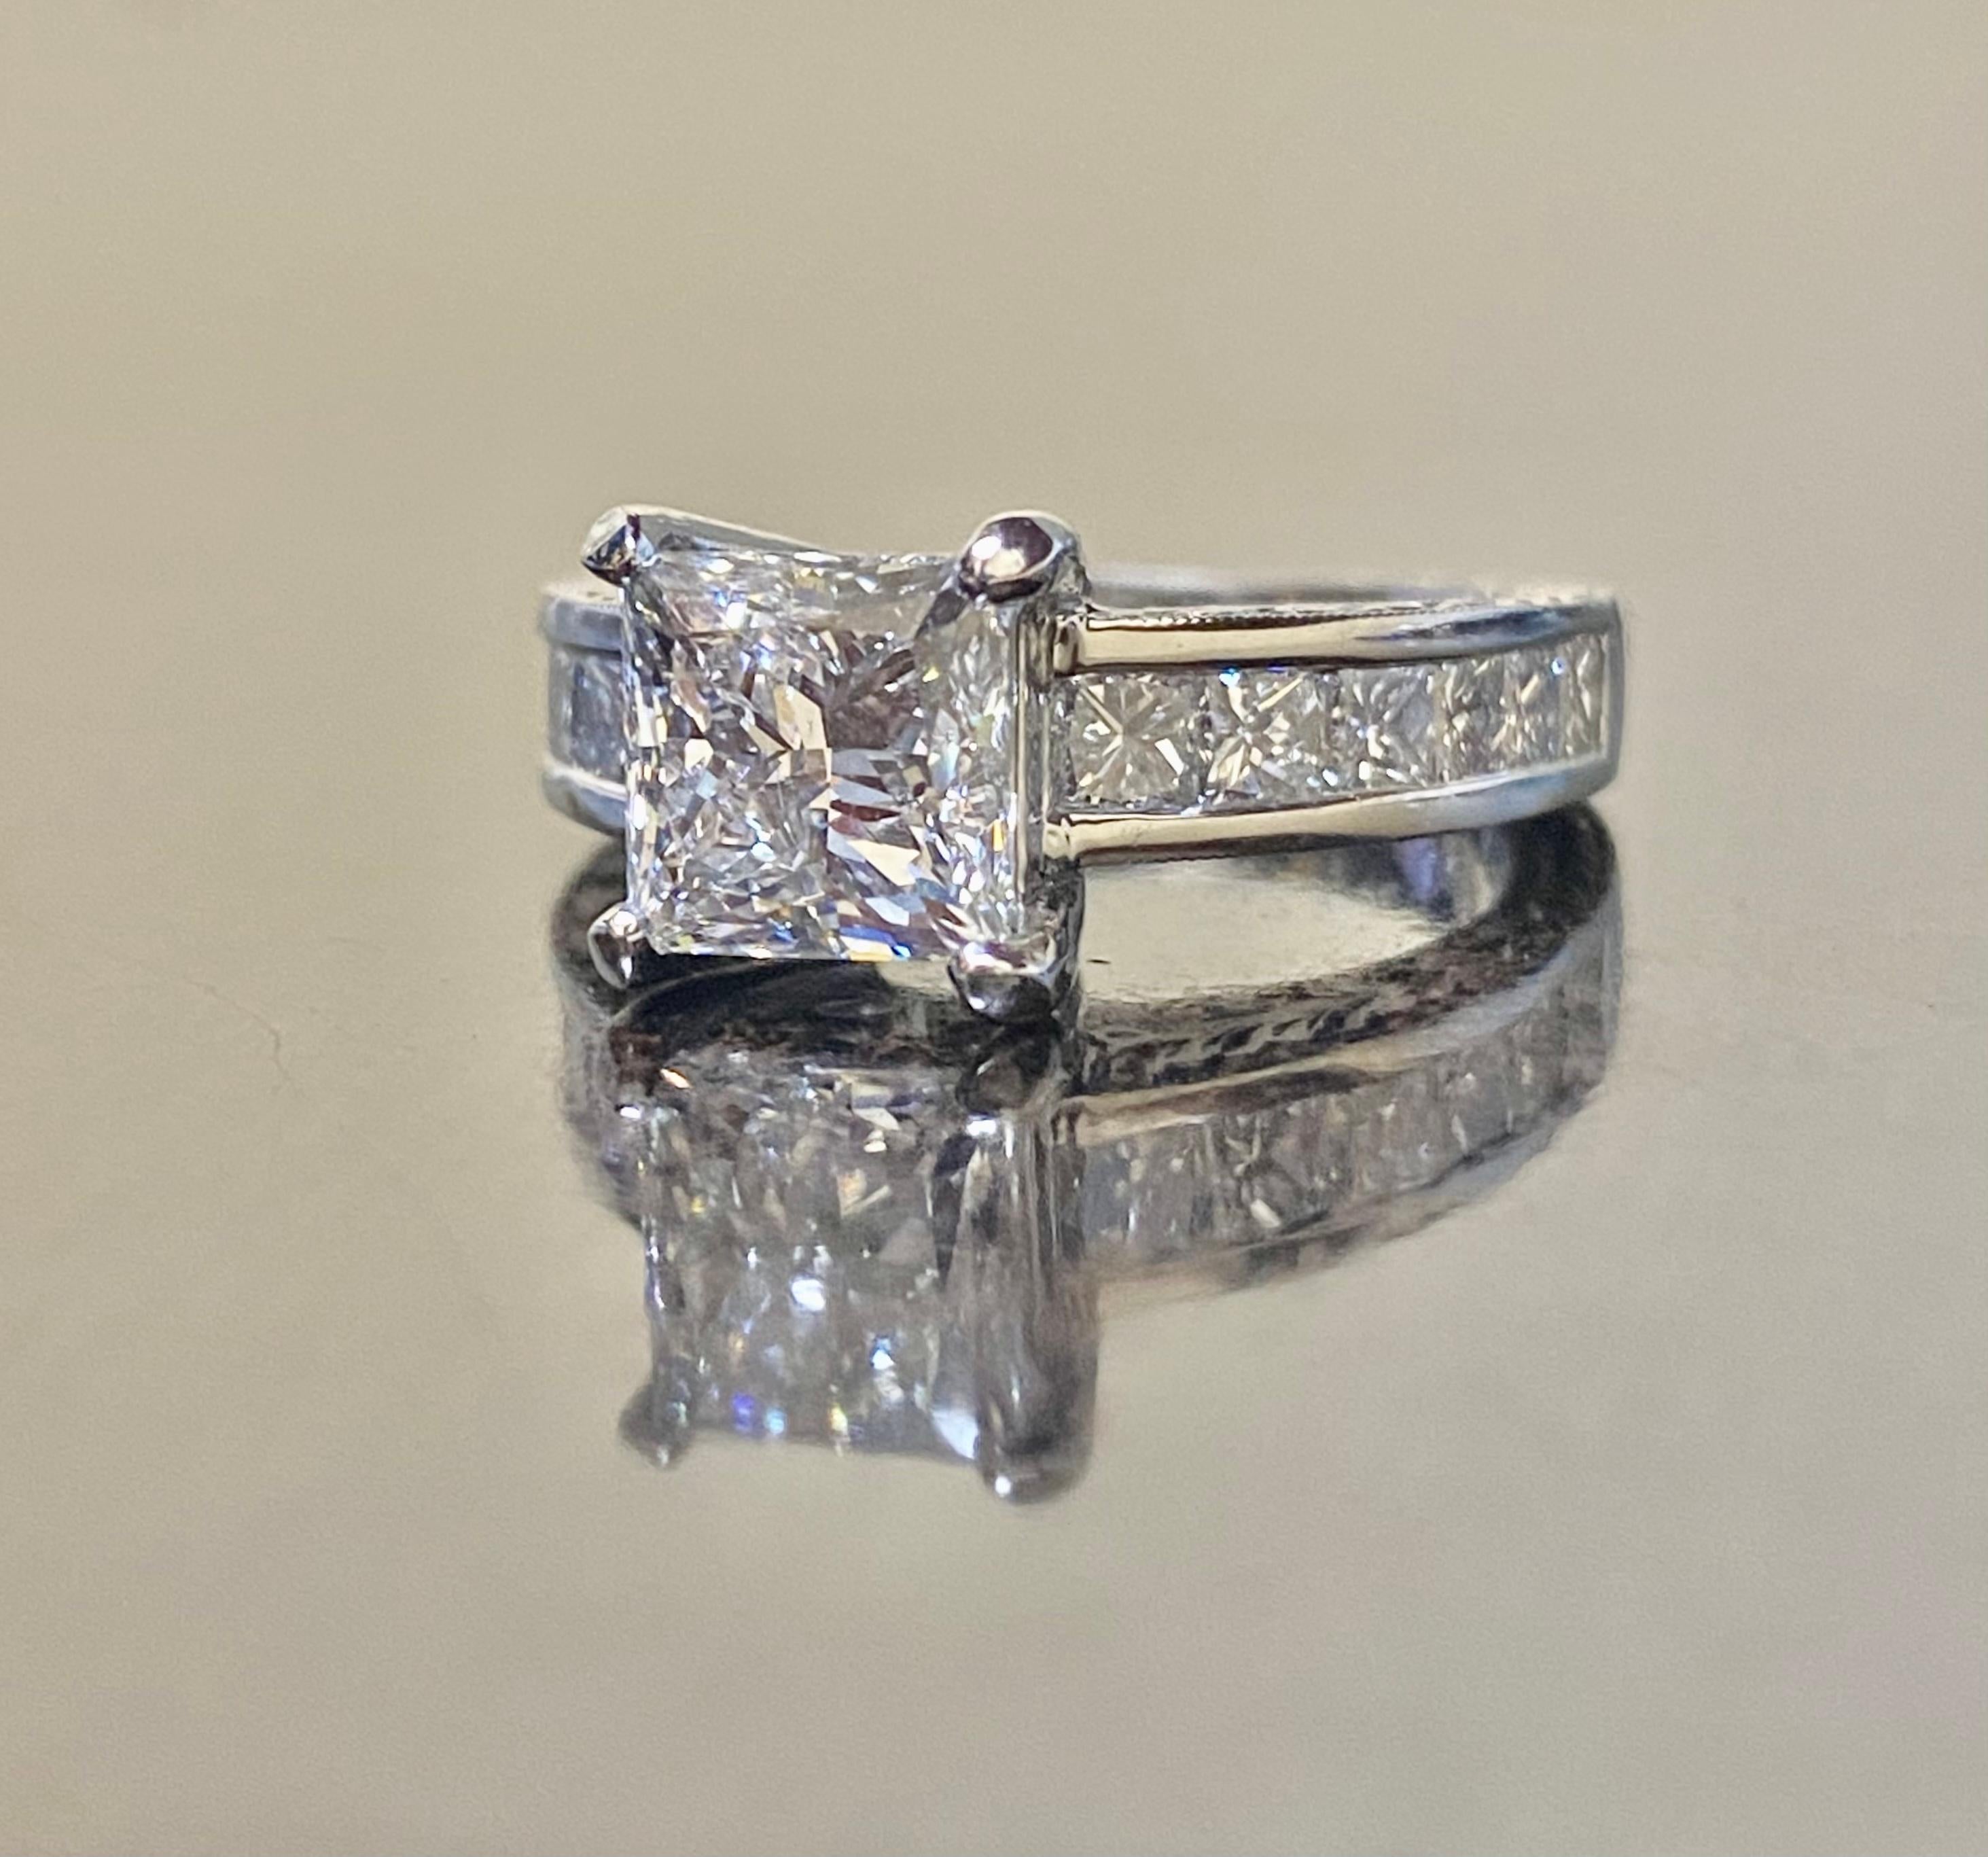 Hand Engraved Platinum GIA E Color 2 Carat Princess Cut Diamond Engagement Ring In New Condition For Sale In Los Angeles, CA